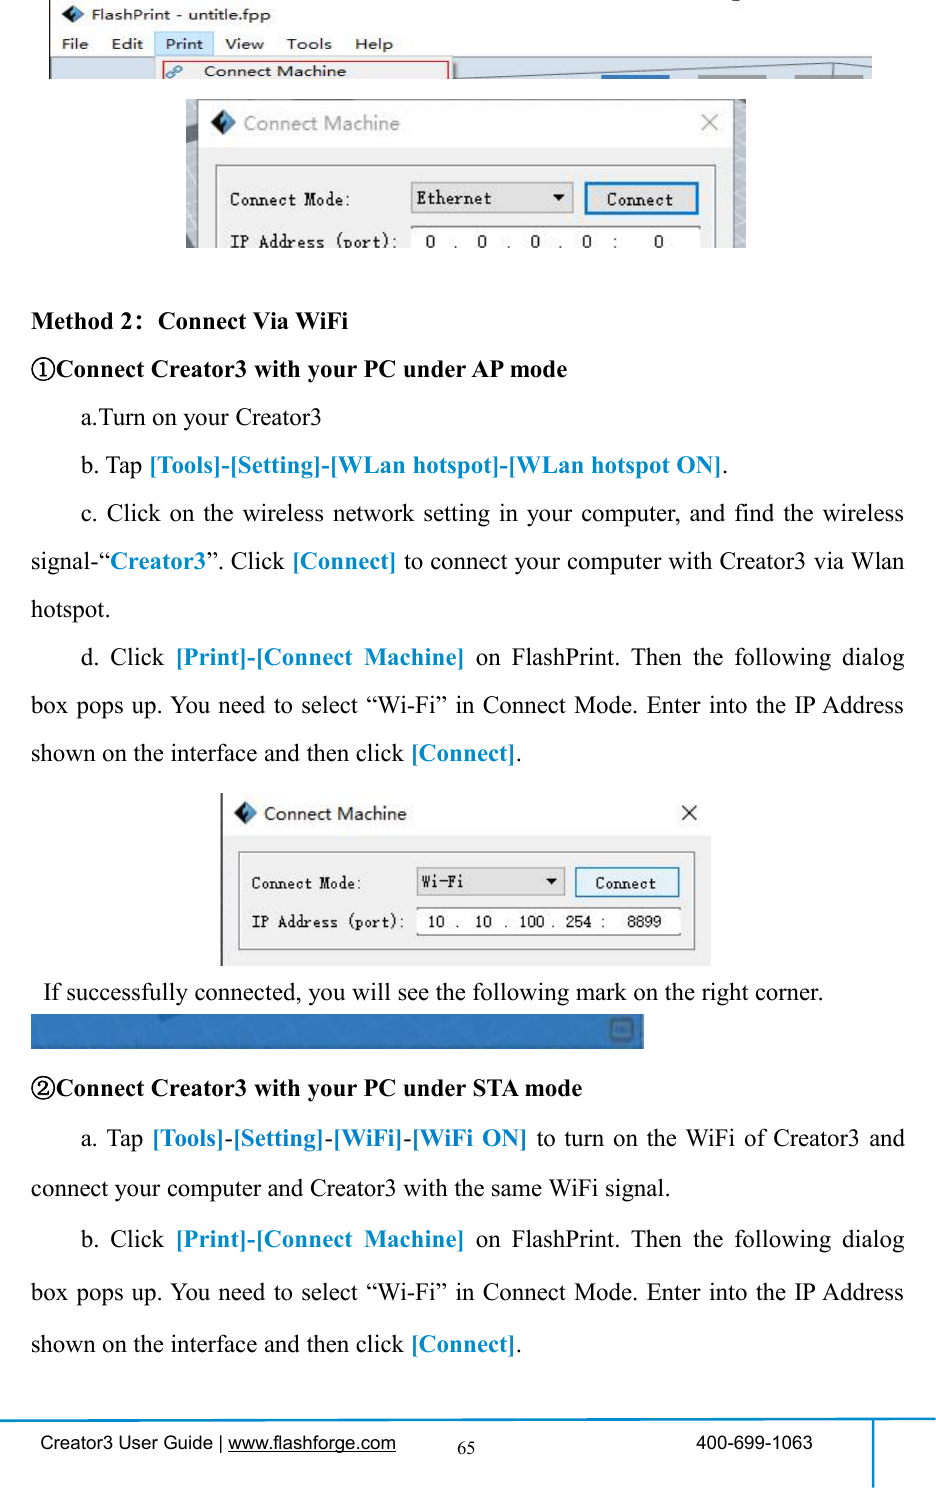 Creator3 User Guide | www.flashforge.com 400-699-106365Method 2：Connect Via WiFi①Connect Creator3 with your PC under AP modea.Turn on your Creator3b. Tap [Tools]-[Setting]-[WLan hotspot]-[WLan hotspot ON].c. Click on the wireless network setting in your computer, and find the wirelesssignal-“Creator3”. Click [Connect] to connect your computer with Creator3 via Wlanhotspot.d. Click [Print]-[Connect Machine] on FlashPrint. Then the following dialogbox pops up. You need to select “Wi-Fi” in Connect Mode. Enter into the IP Addressshown on the interface and then click [Connect].If successfully connected, you will see the following mark on the right corner.②Connect Creator3 with your PC under STA modea. Tap [Tools]-[Setting]-[WiFi]-[WiFi ON] to turn on the WiFi of Creator3 andconnect your computer and Creator3 with the same WiFi signal.b. Click [Print]-[Connect Machine] on FlashPrint. Then the following dialogbox pops up. You need to select “Wi-Fi” in Connect Mode. Enter into the IP Addressshown on the interface and then click [Connect].